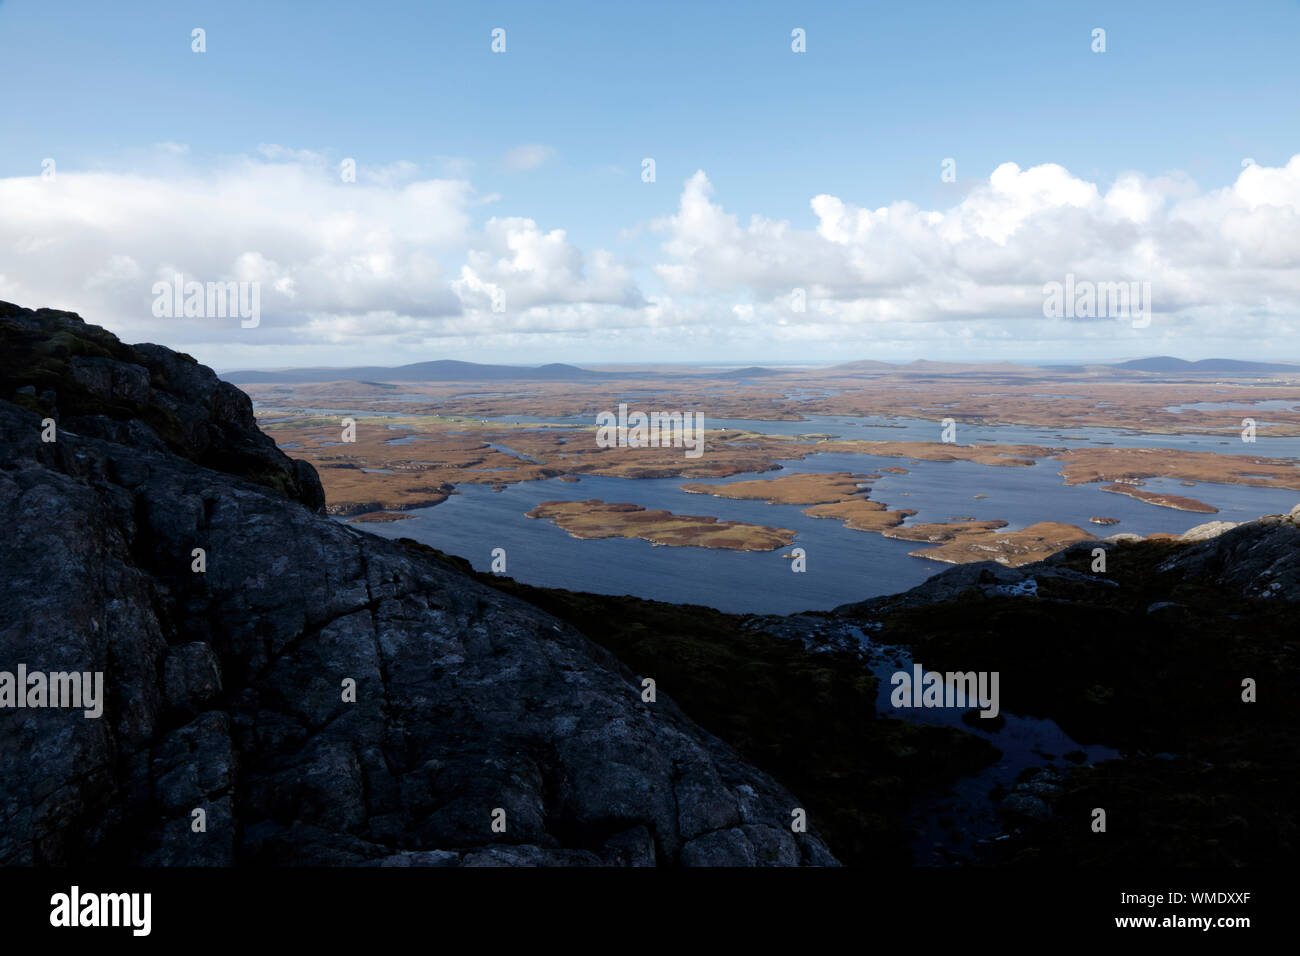 View from the slopes of Eaval over the lochan landscape of the Isle of North Uist, Outer Hebrides, Scotland. Stock Photo